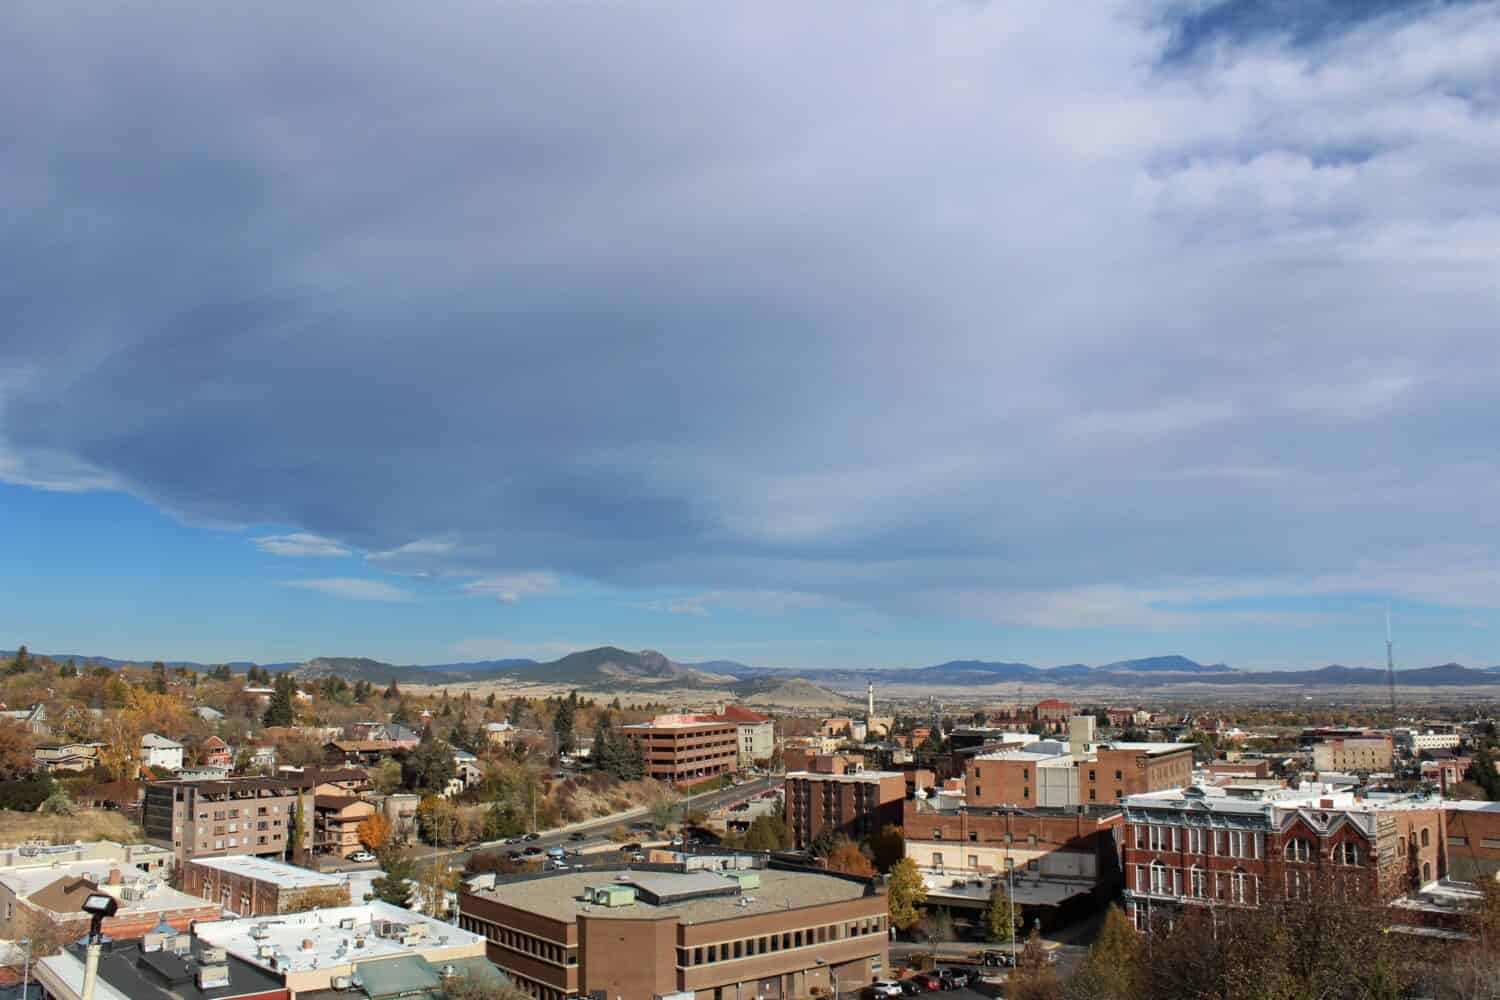 Overlooking downtown Helena, Montana with clouds in the sky